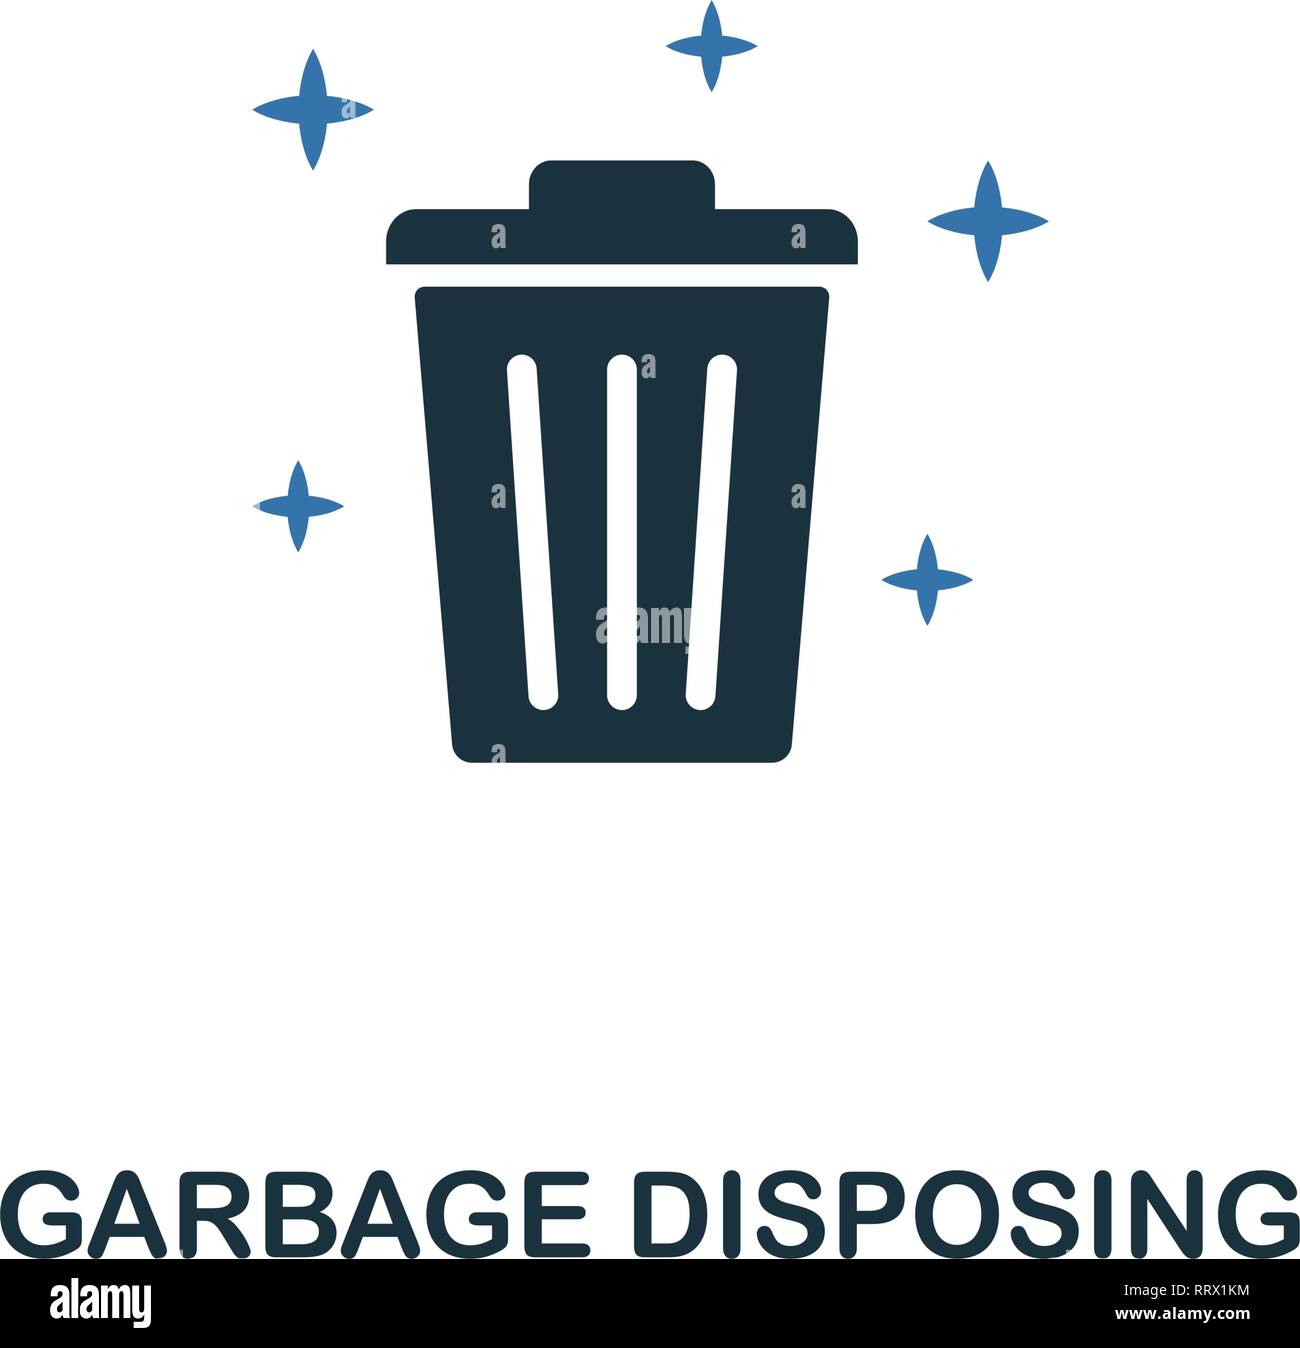 https://c8.alamy.com/comp/RRX1KM/garbage-disposing-icon-creative-two-colors-design-from-cleaning-icons-collection-ui-and-ux-usage-illustration-of-garbage-disposing-icon-pictogram-RRX1KM.jpg